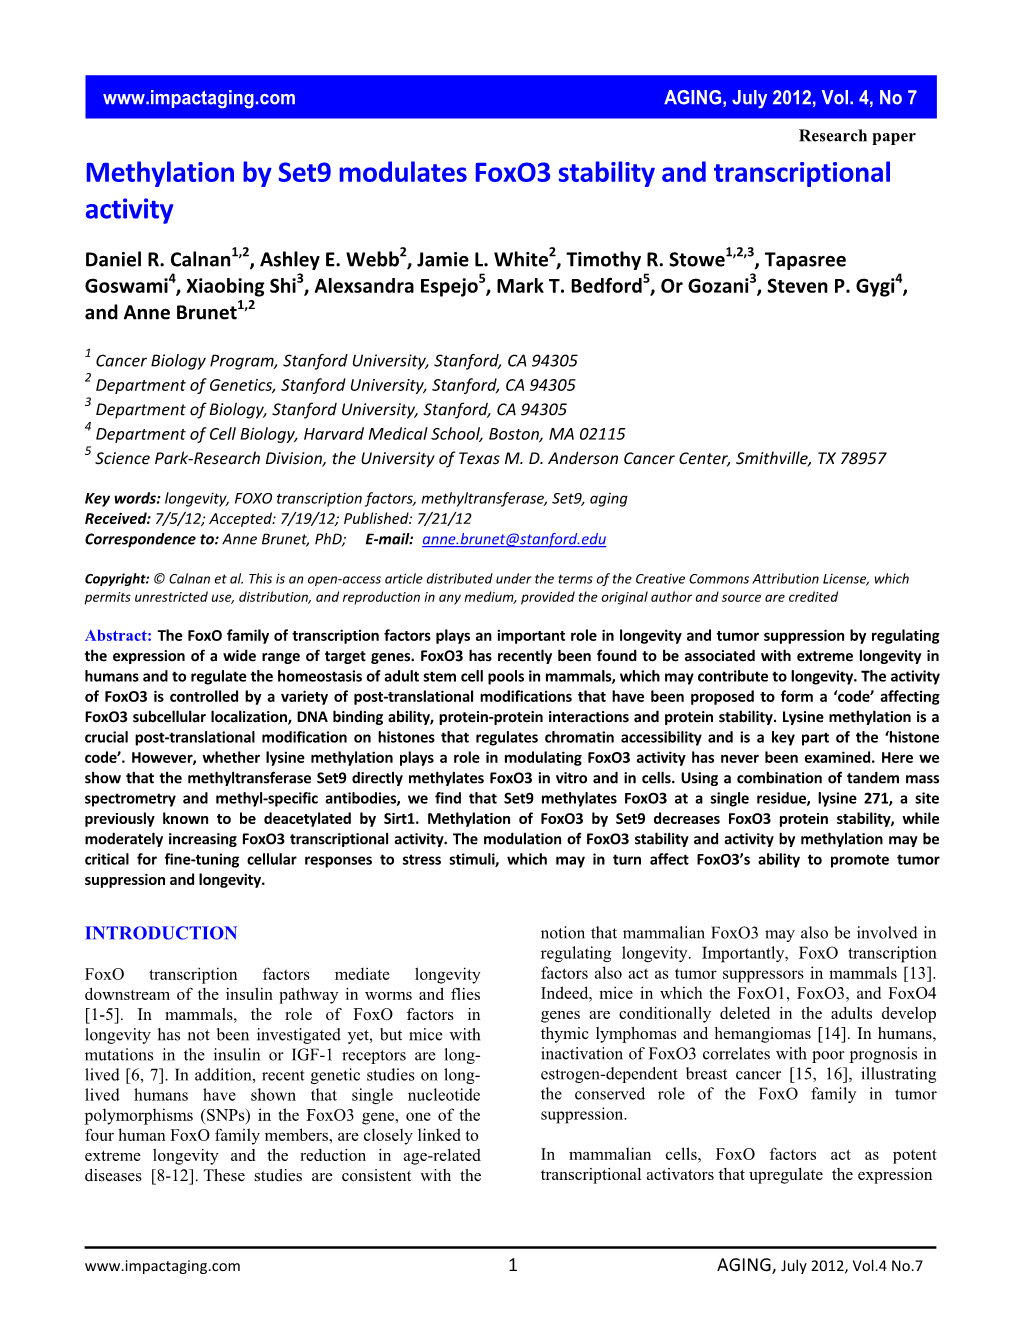 Methylation by Set9 Modulates Foxo3 Stability and Transcriptional Activity